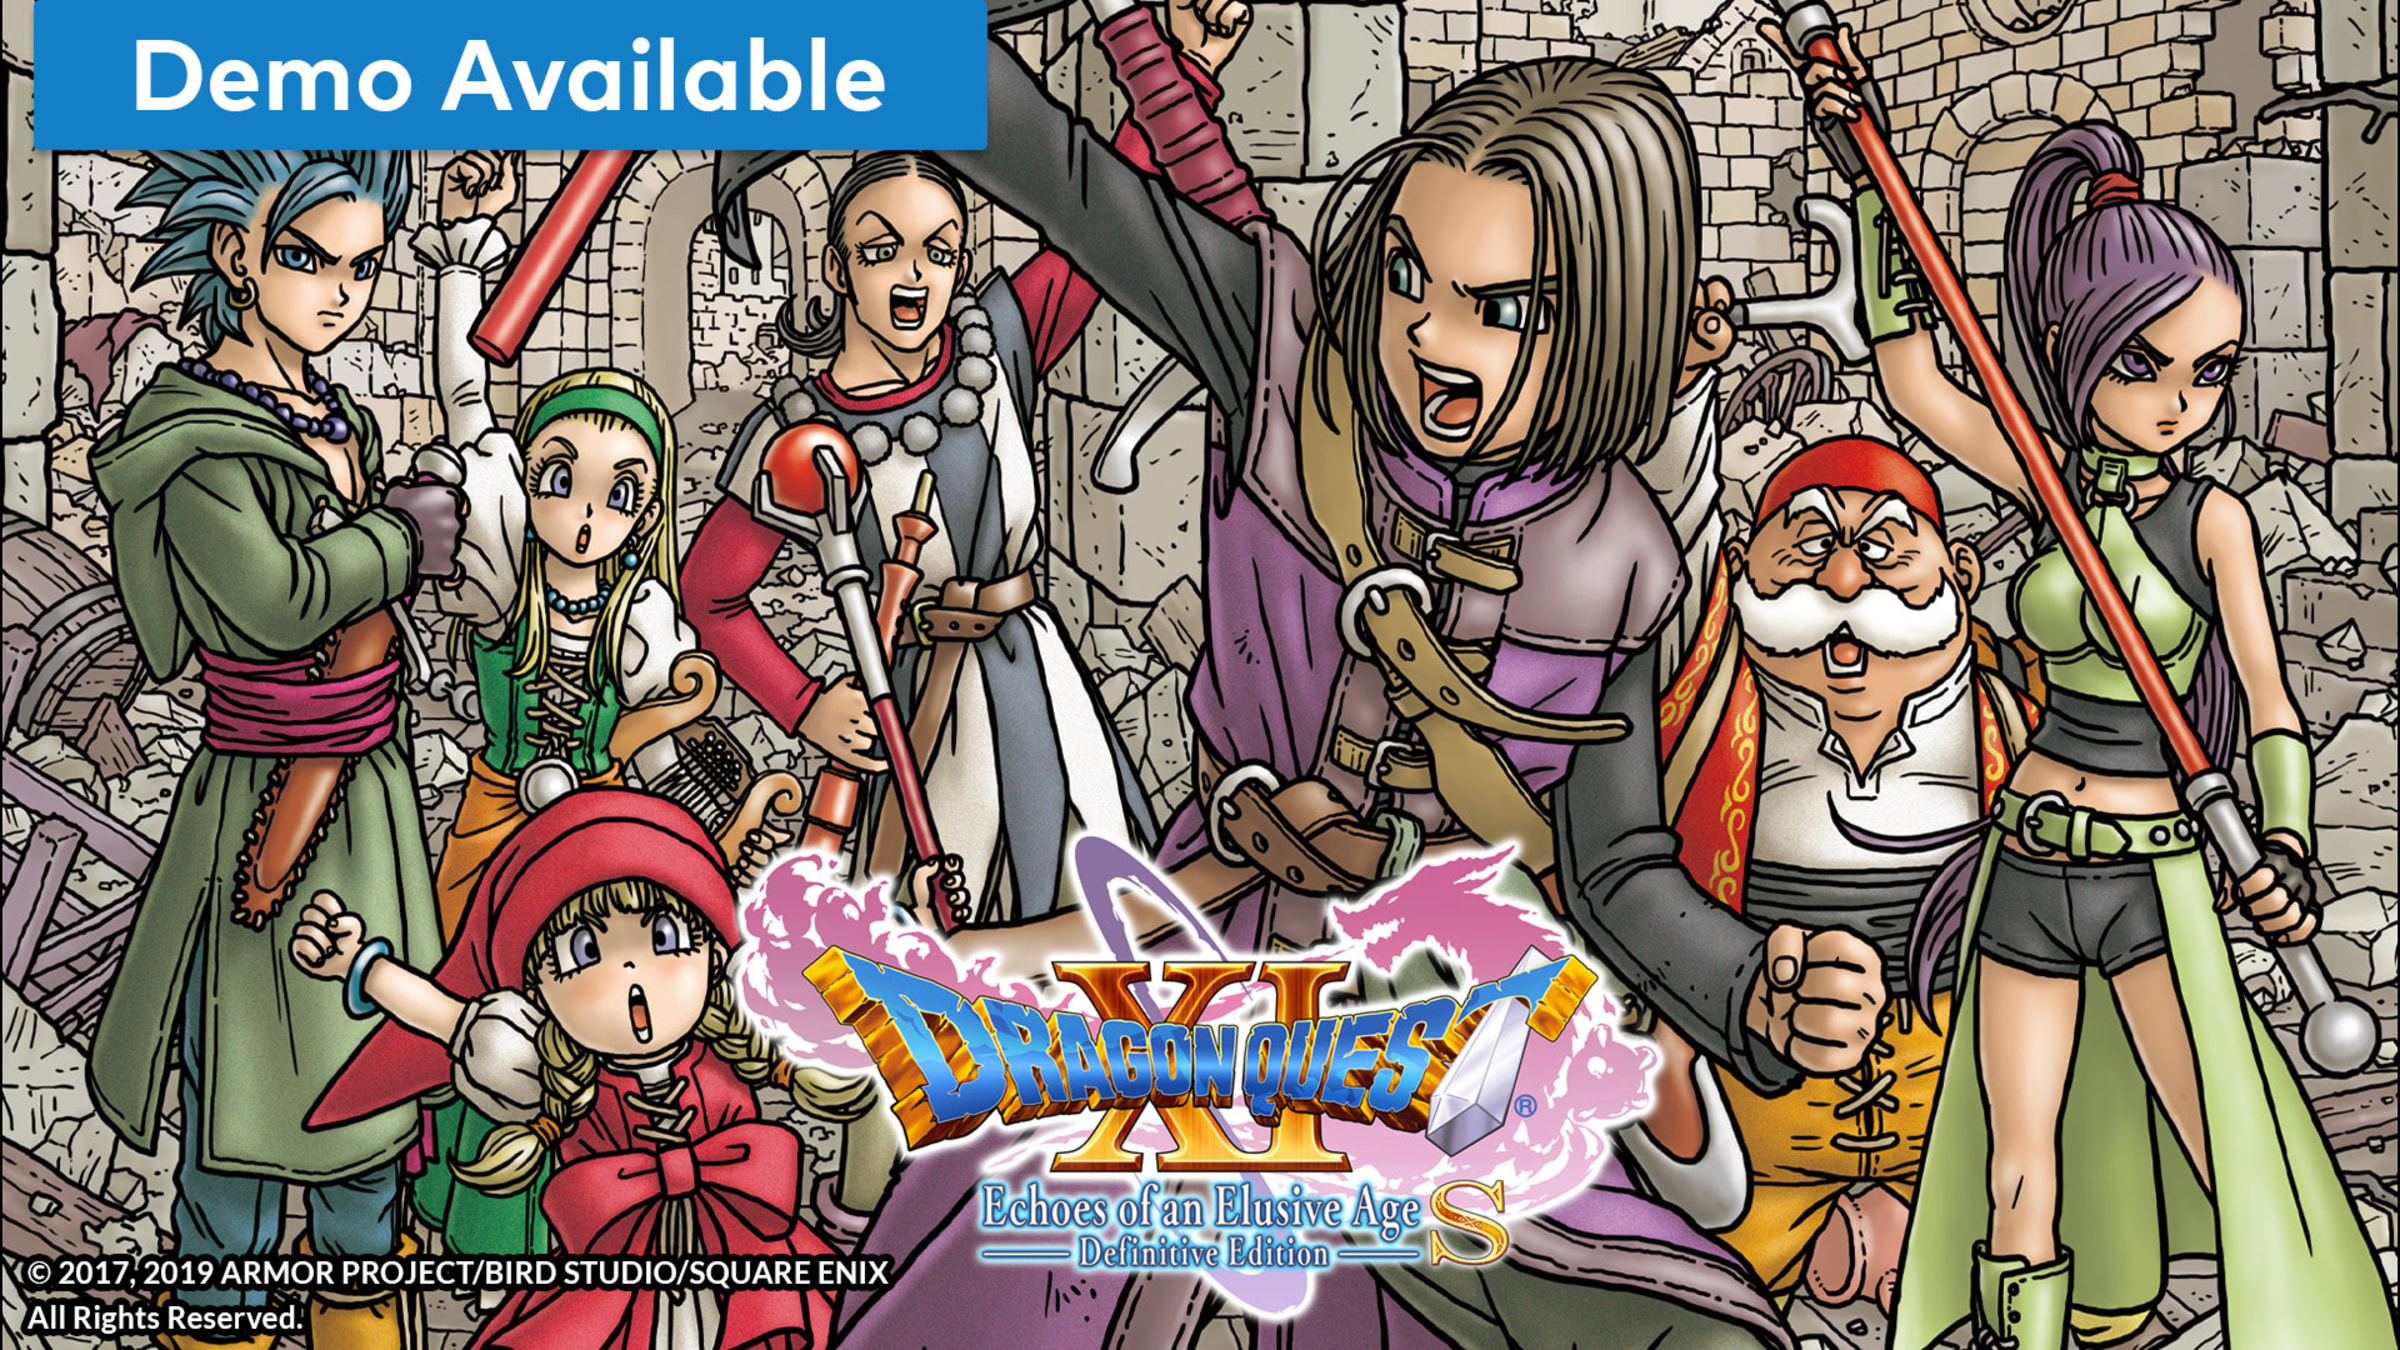 Dragon Quest® Xi S Echoes Of An Elusive Age Definitive Edition For Nintendo Switch Nintendo